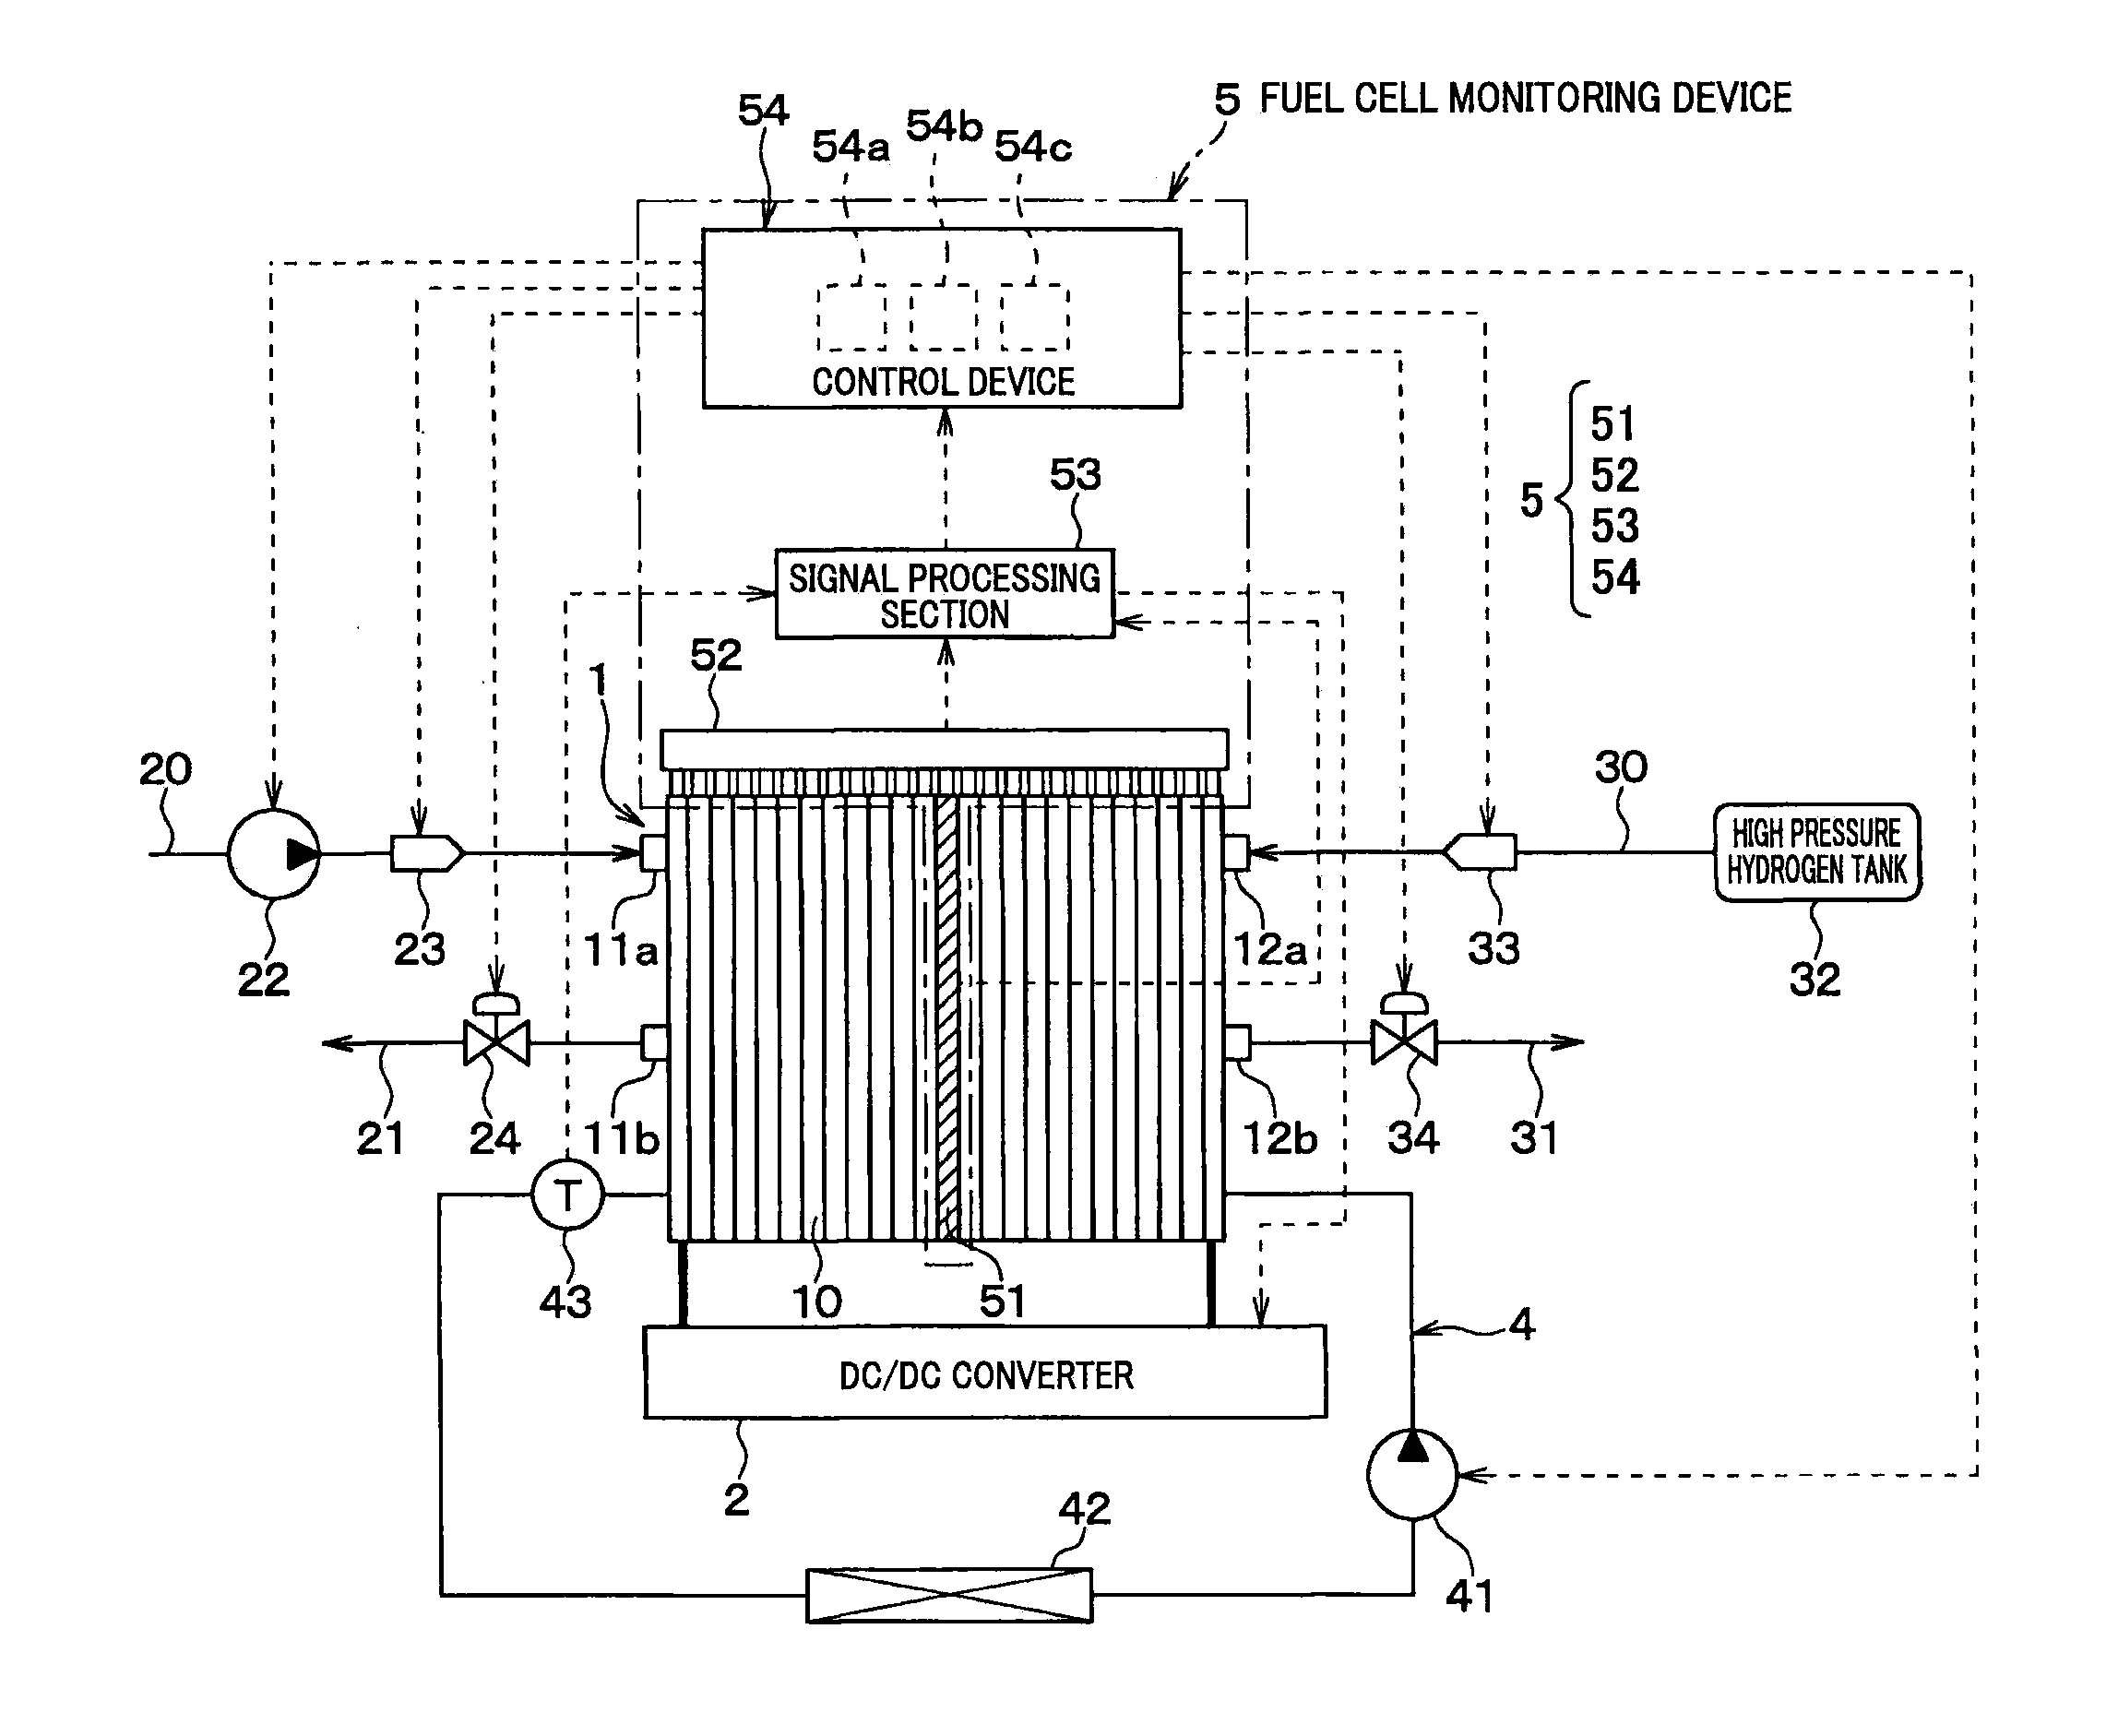 Fuel cell monitoring device